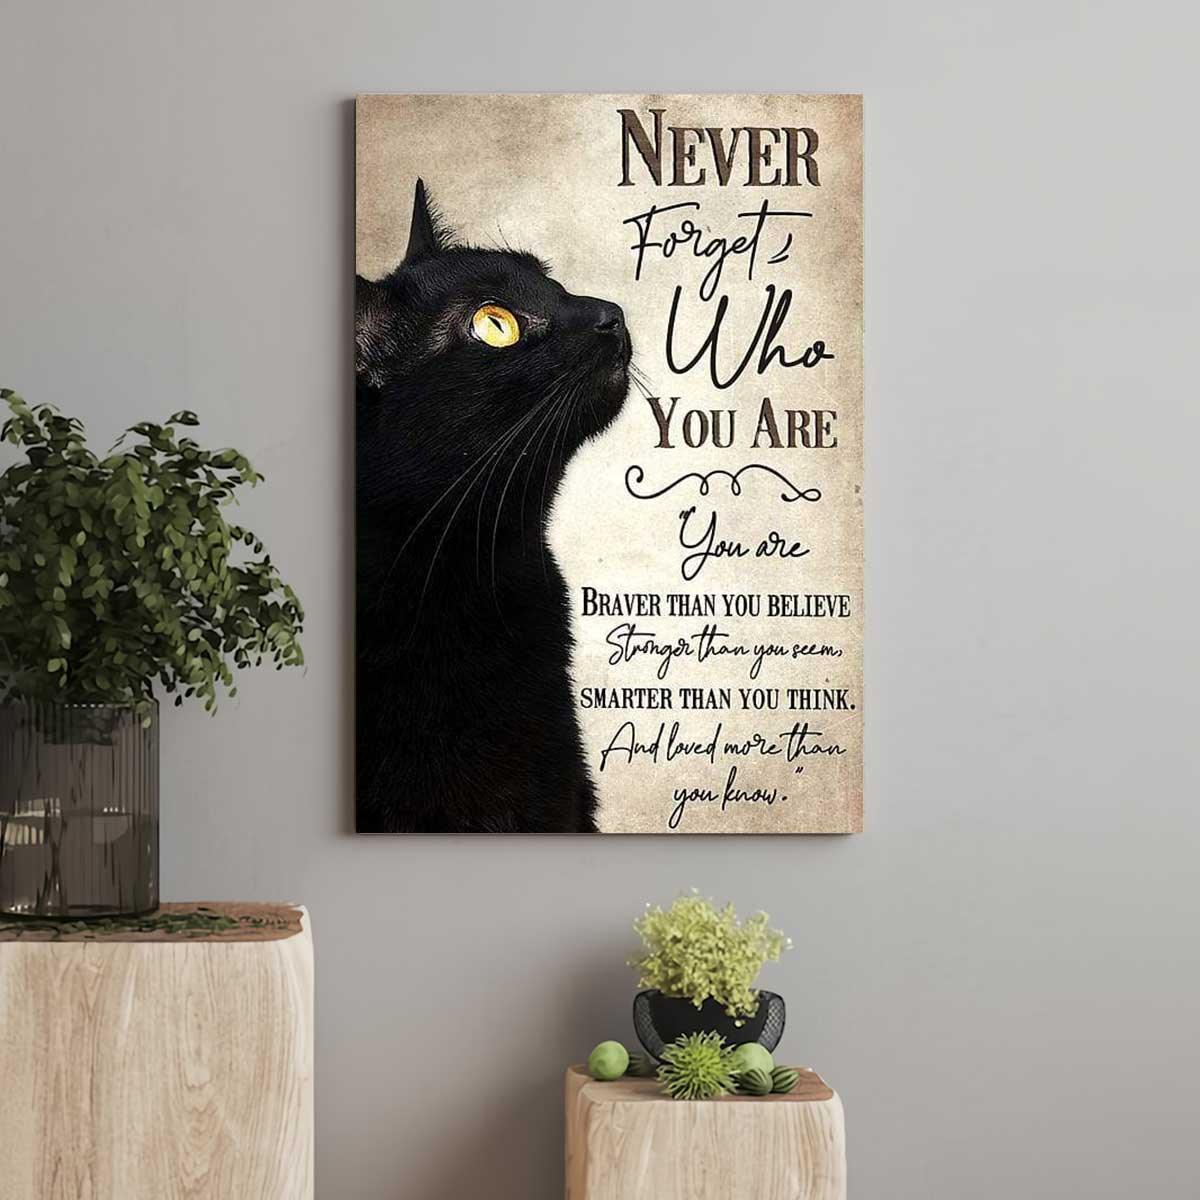 Black Cat Portrait Canvas - Gift For Cat Lovers Mattle Canvas, Premium Wrapped Canvas - Never Forget Who You Are, You are braver than you believe - Amzanimalsgift